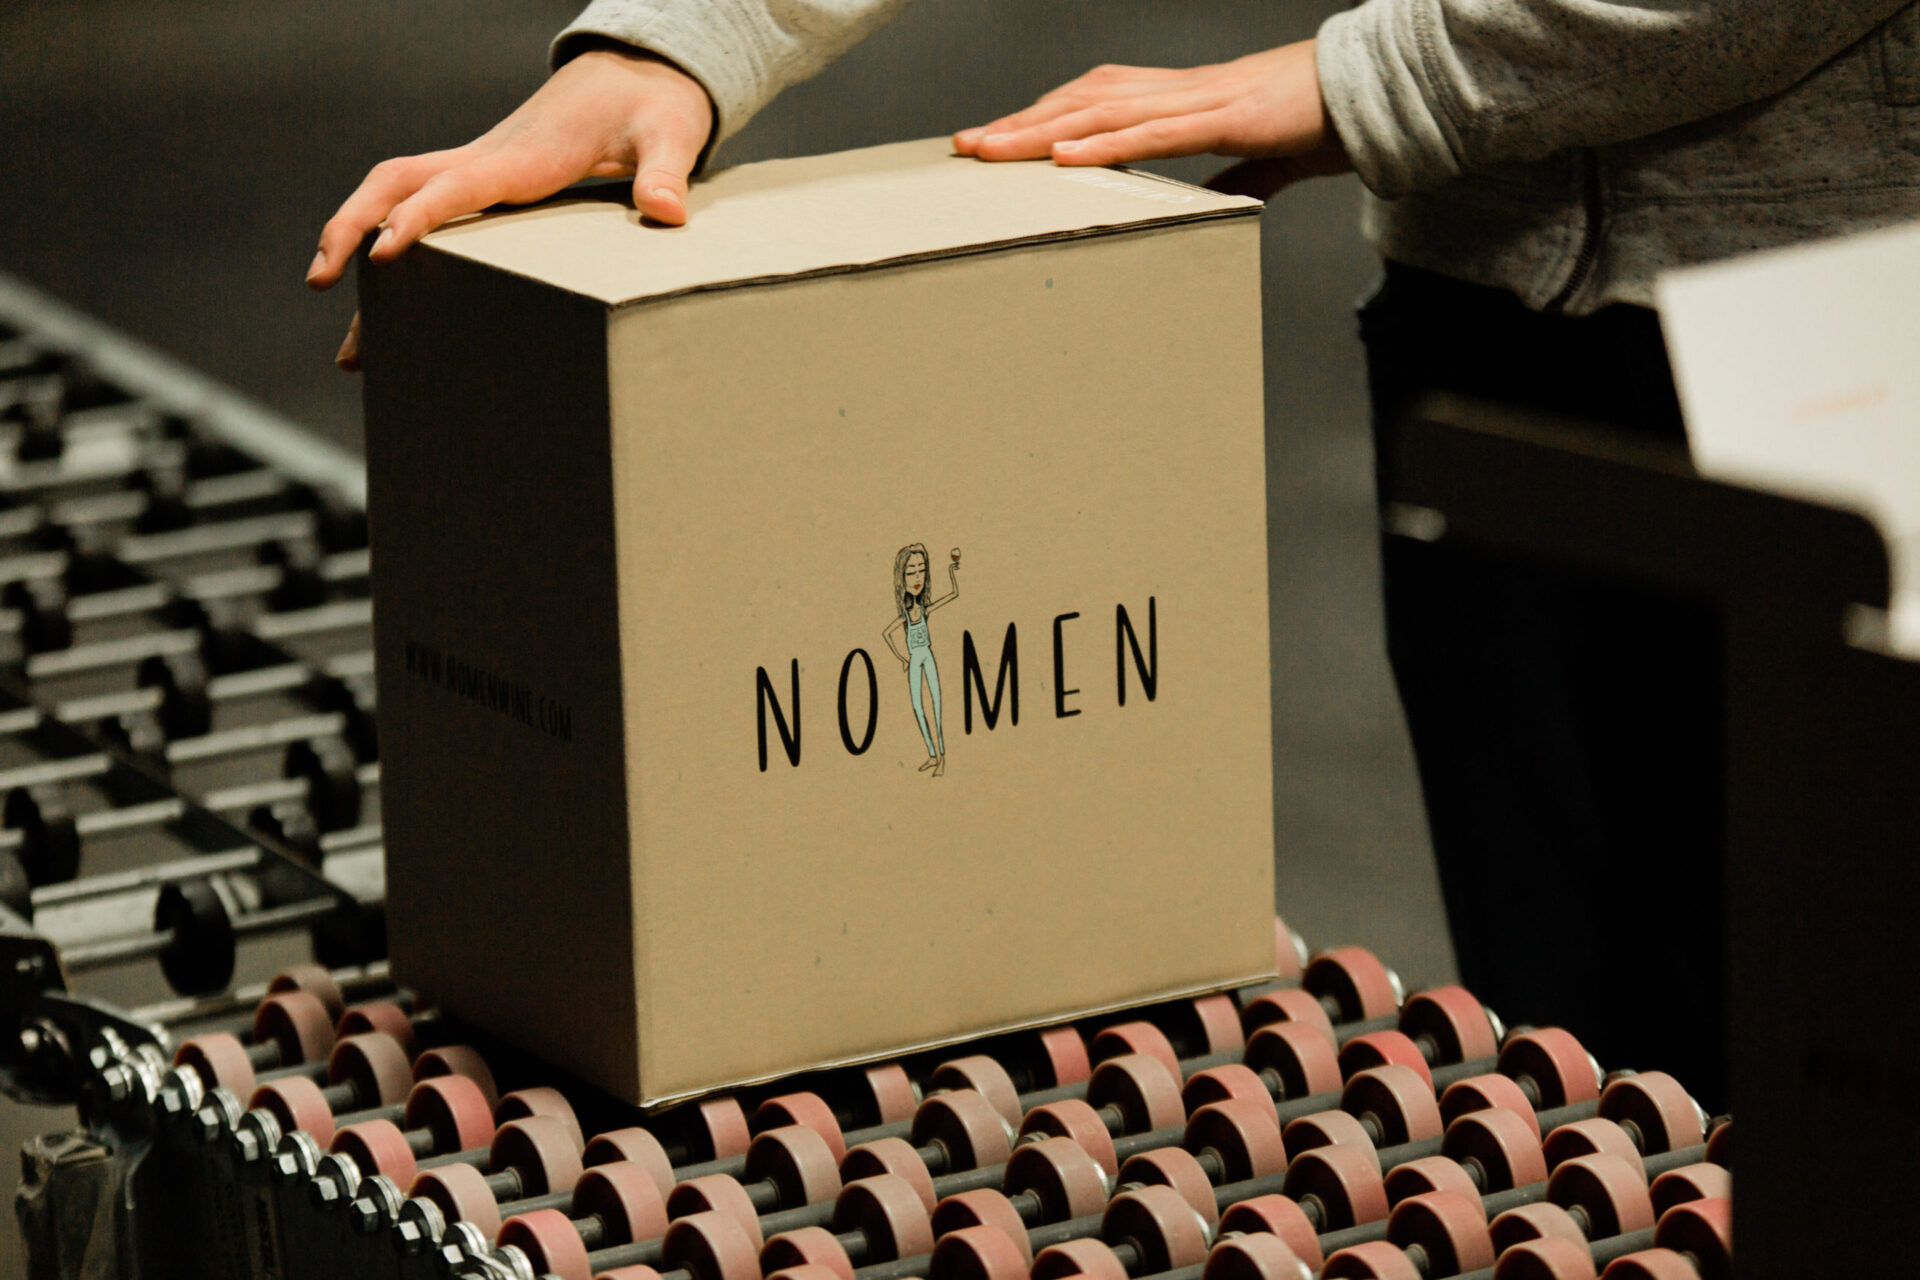 Nomen wine bottles fit into a shoe box-sized package for more convenient delivery.